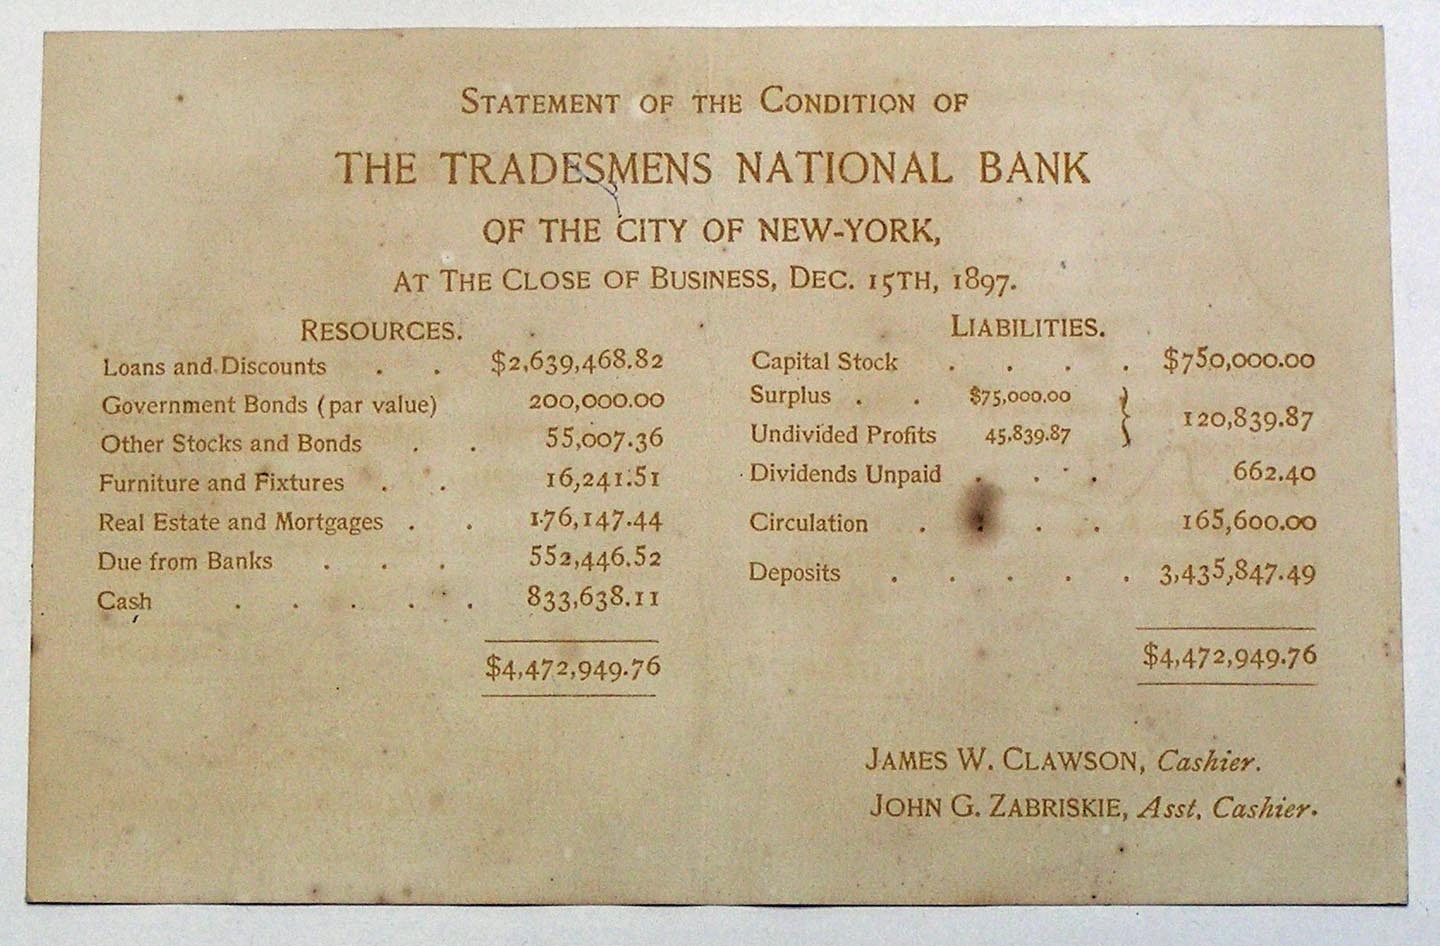 Financial statement from The Tradesmens National Bank of New York from 1897